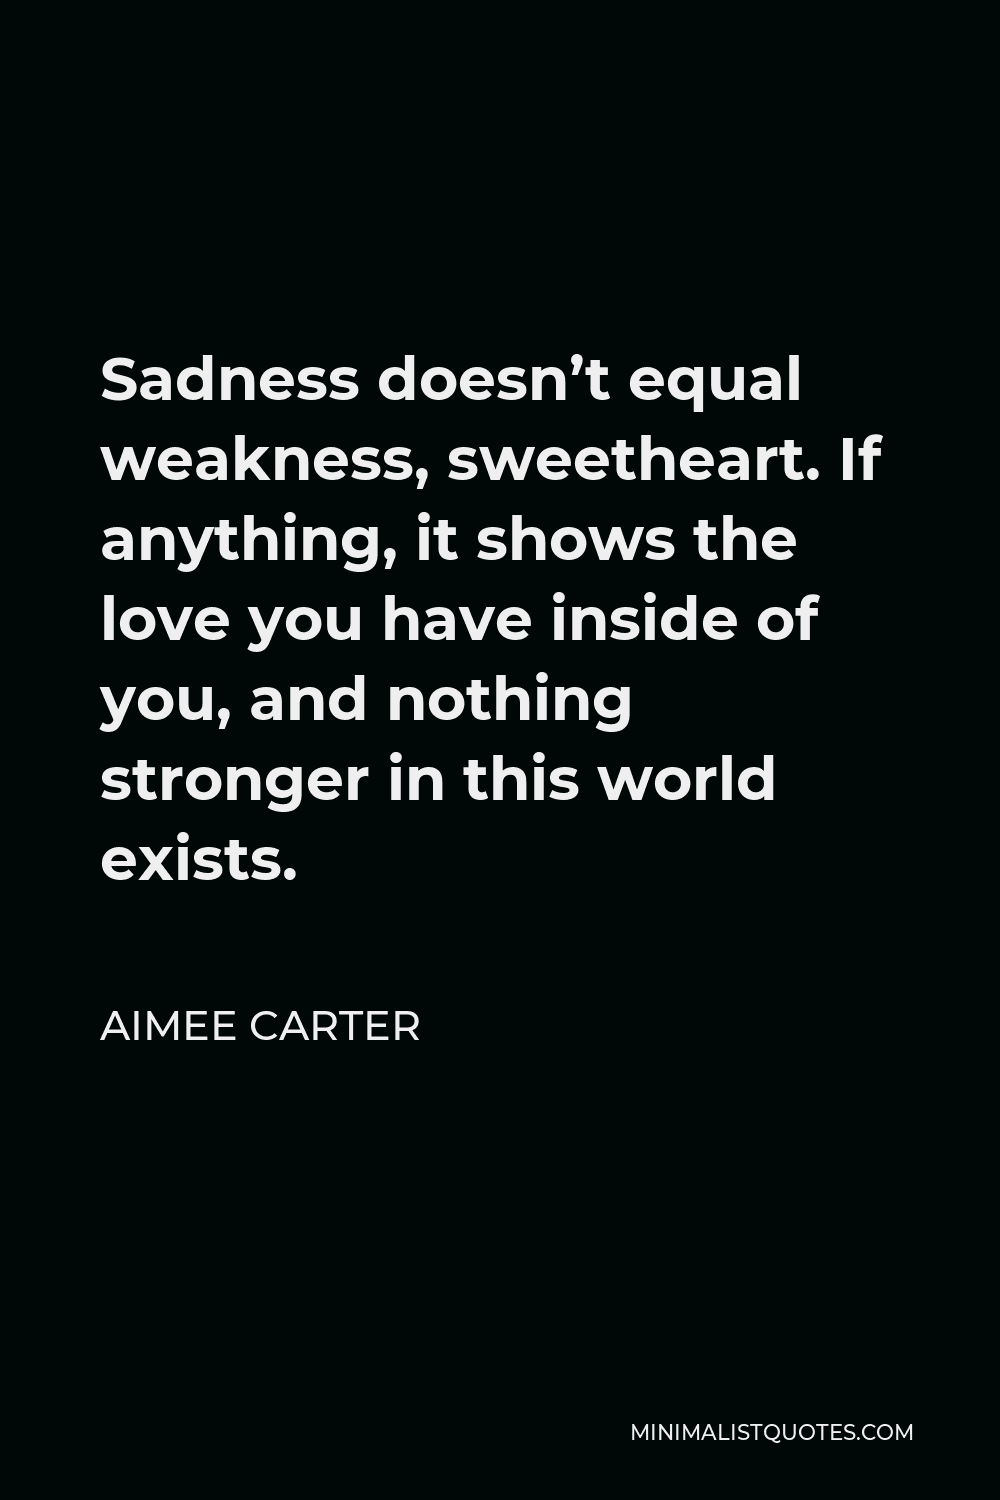 Aimee Carter Quote - Sadness doesn’t equal weakness, sweetheart. If anything, it shows the love you have inside of you, and nothing stronger in this world exists.